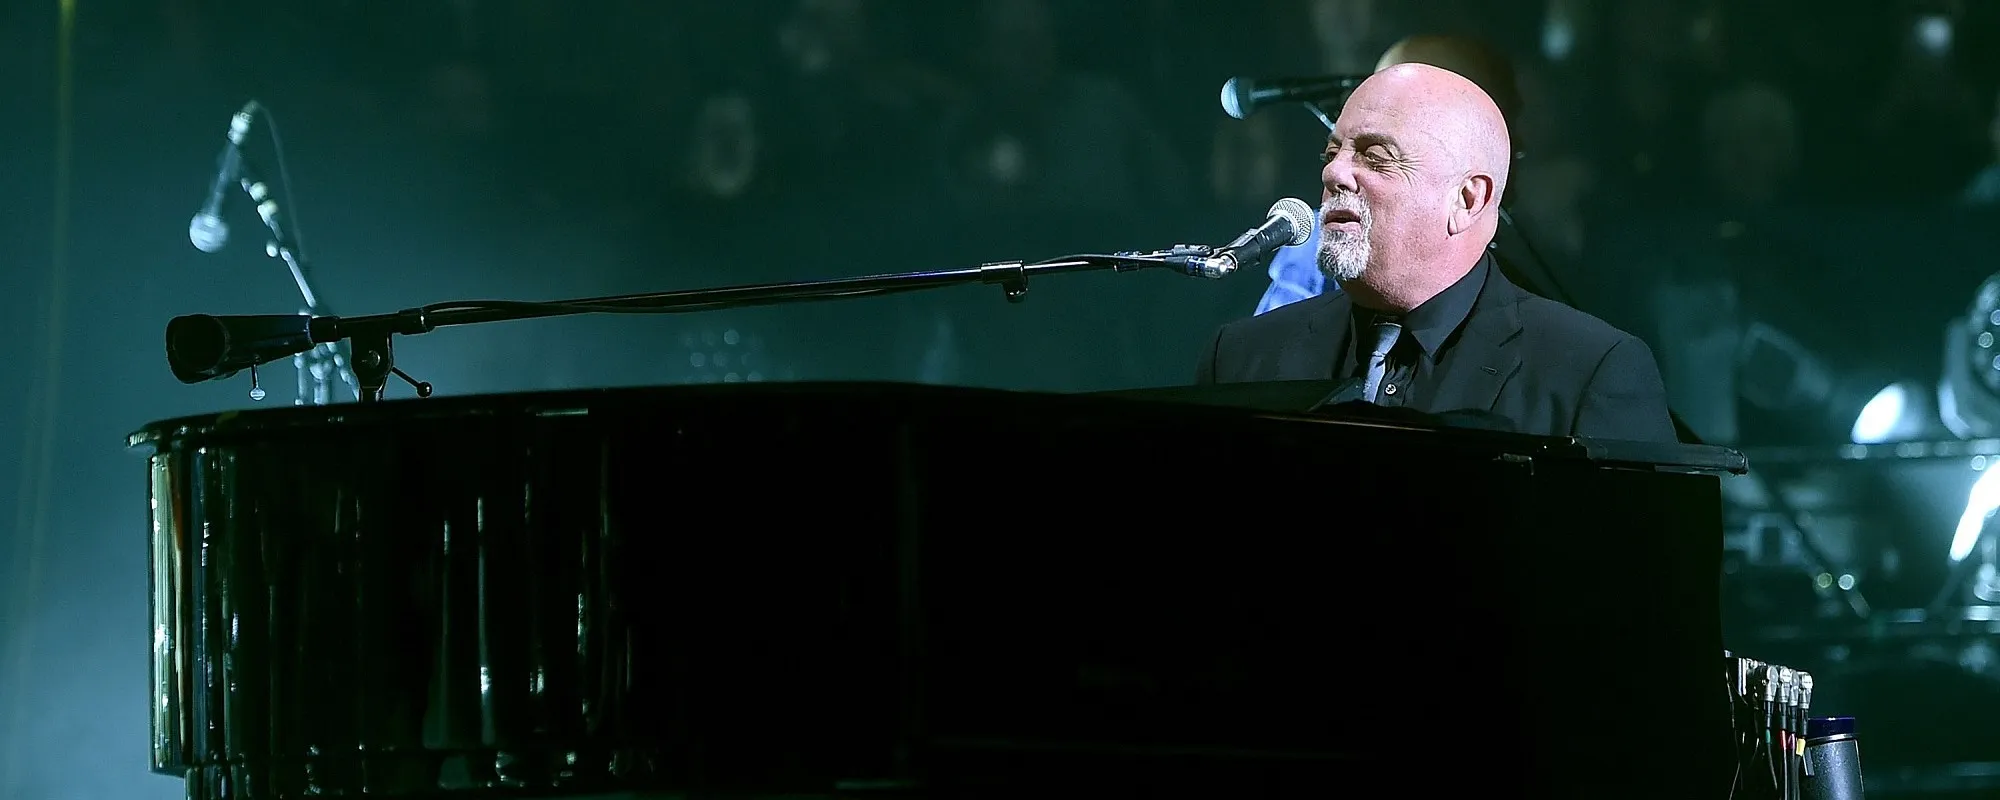 4 Songs You Didn’t Know Featured Billy Joel on Piano